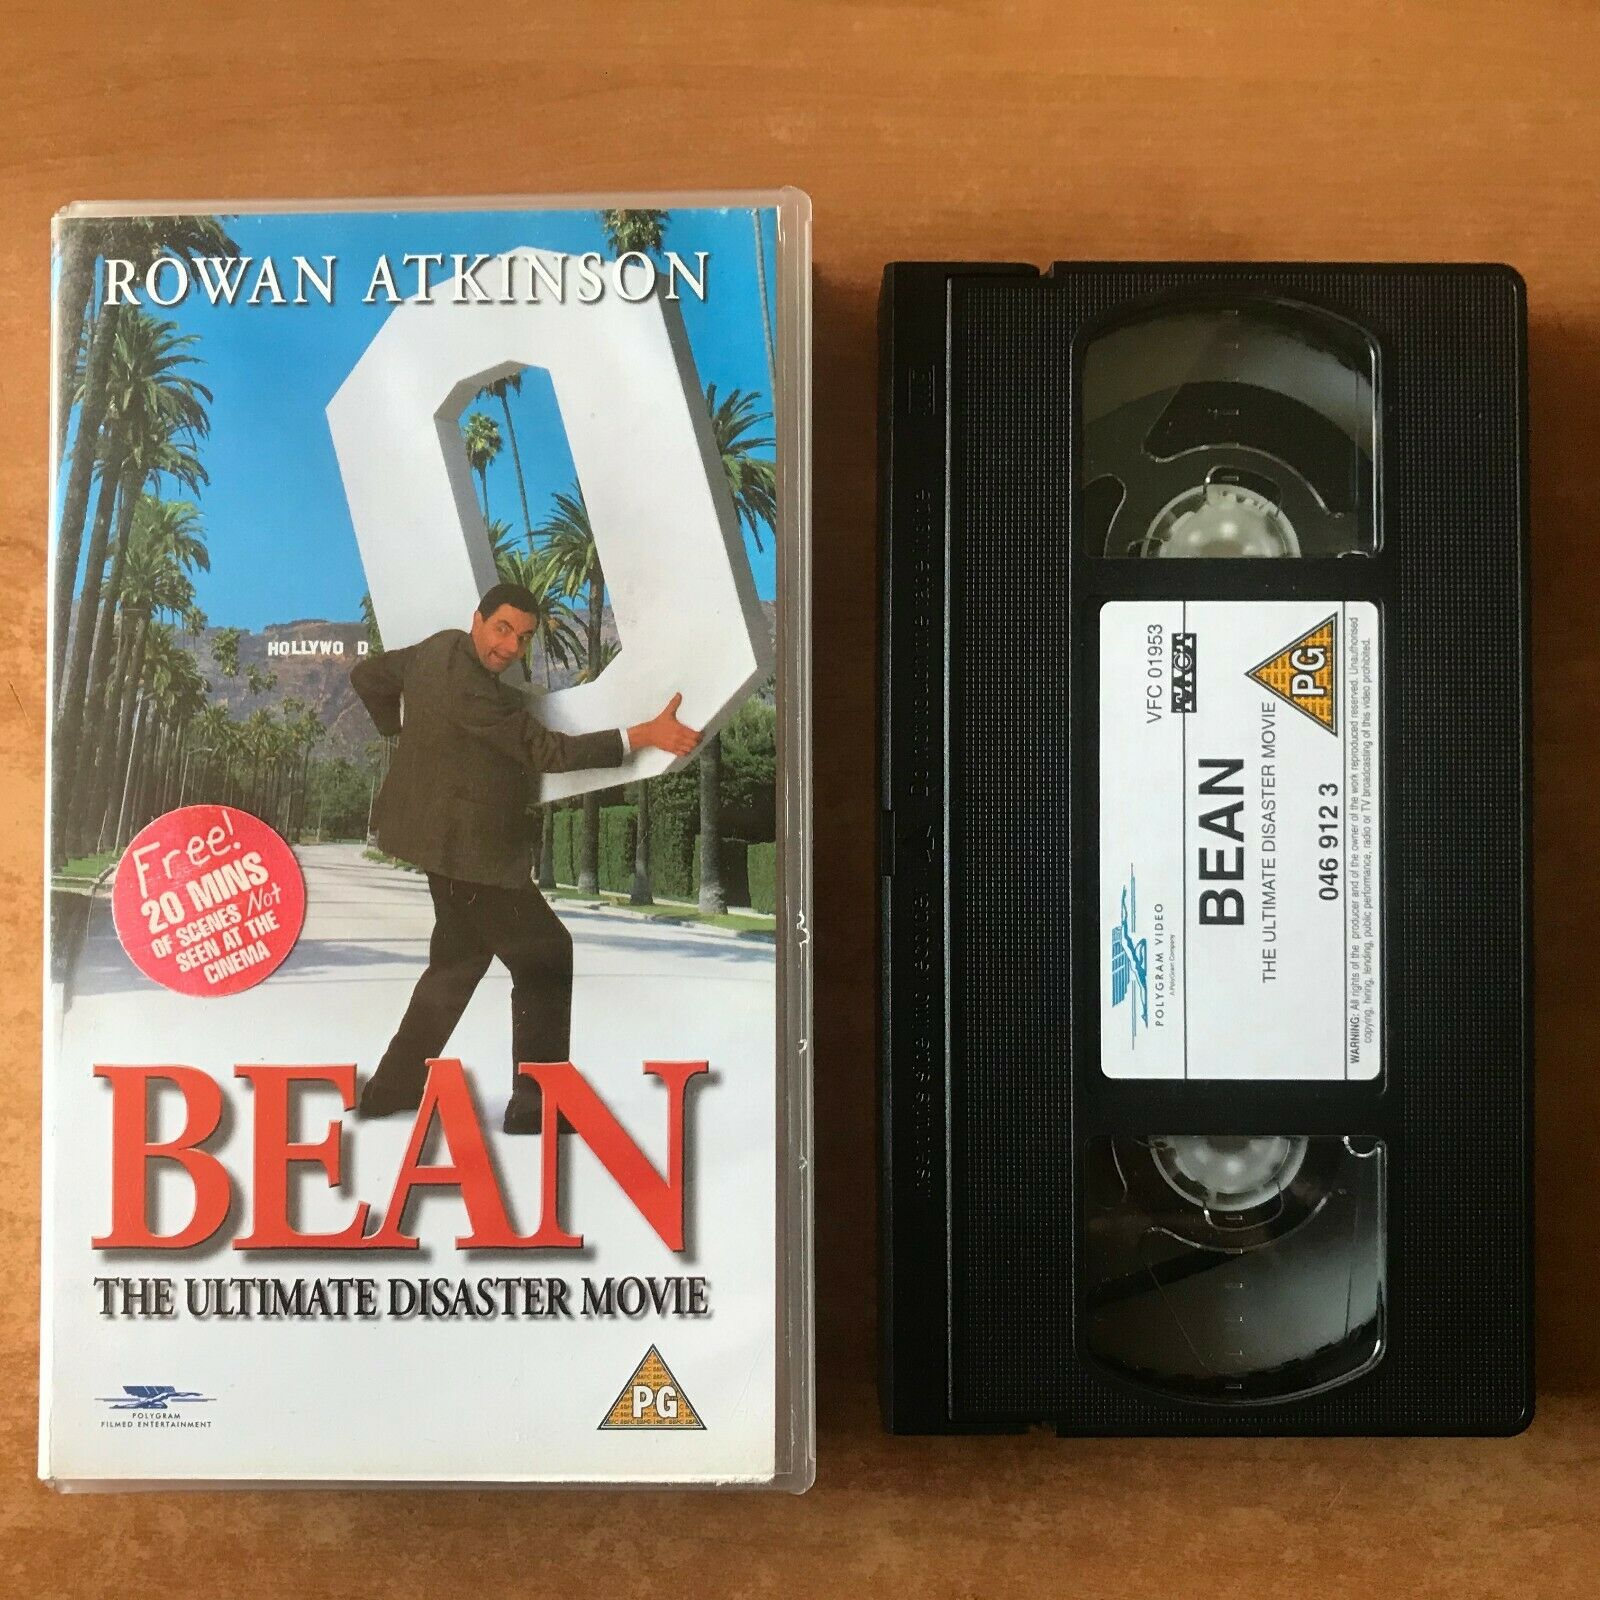 Bean: The Ultimate Disaster Movie (1997) - Sick Comedy - R.Atkinson - Pal VHS-